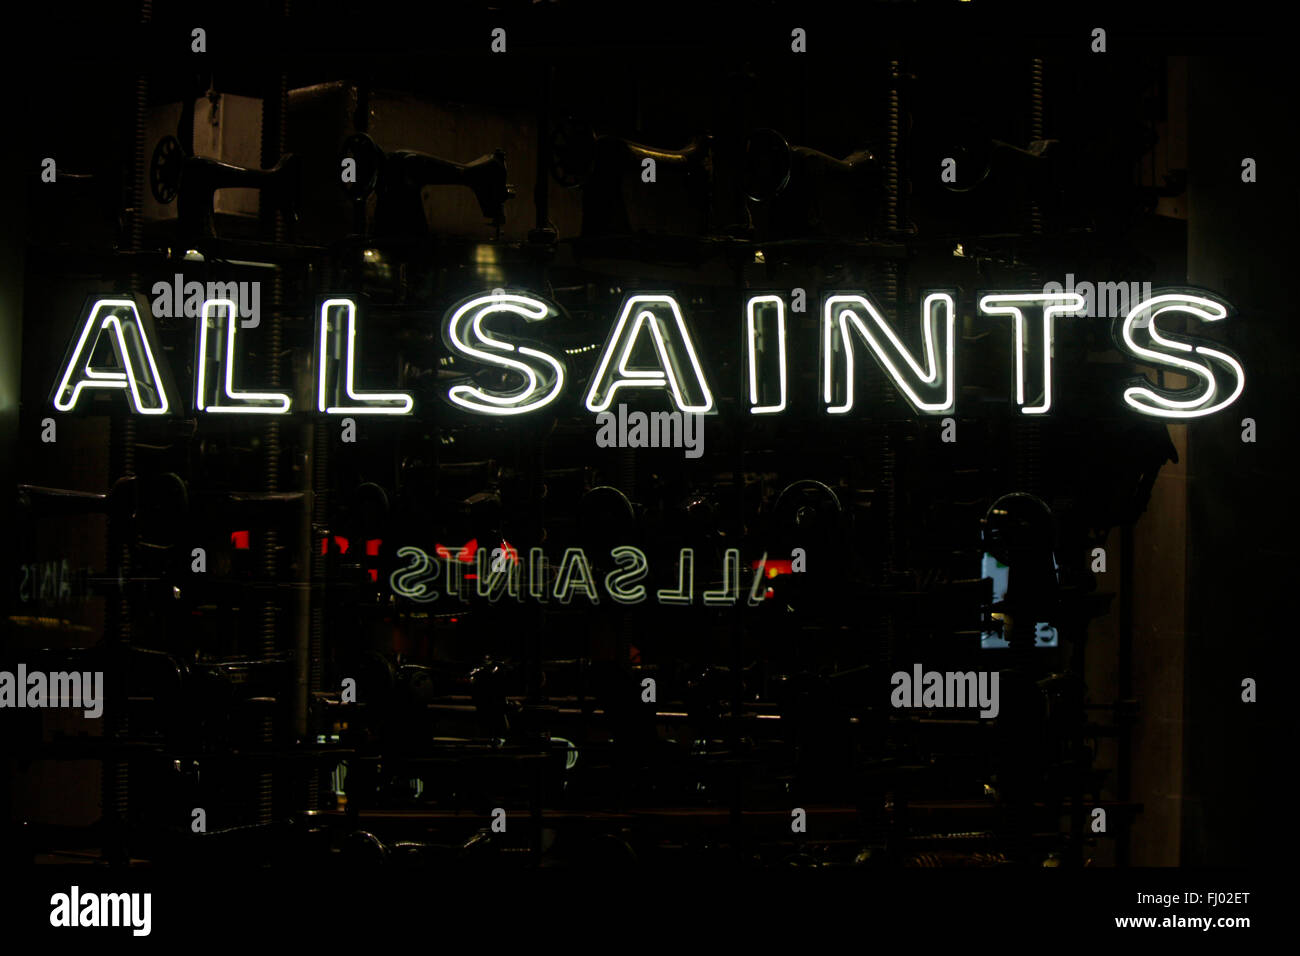 Allsaints High Resolution Stock Photography and Images - Alamy